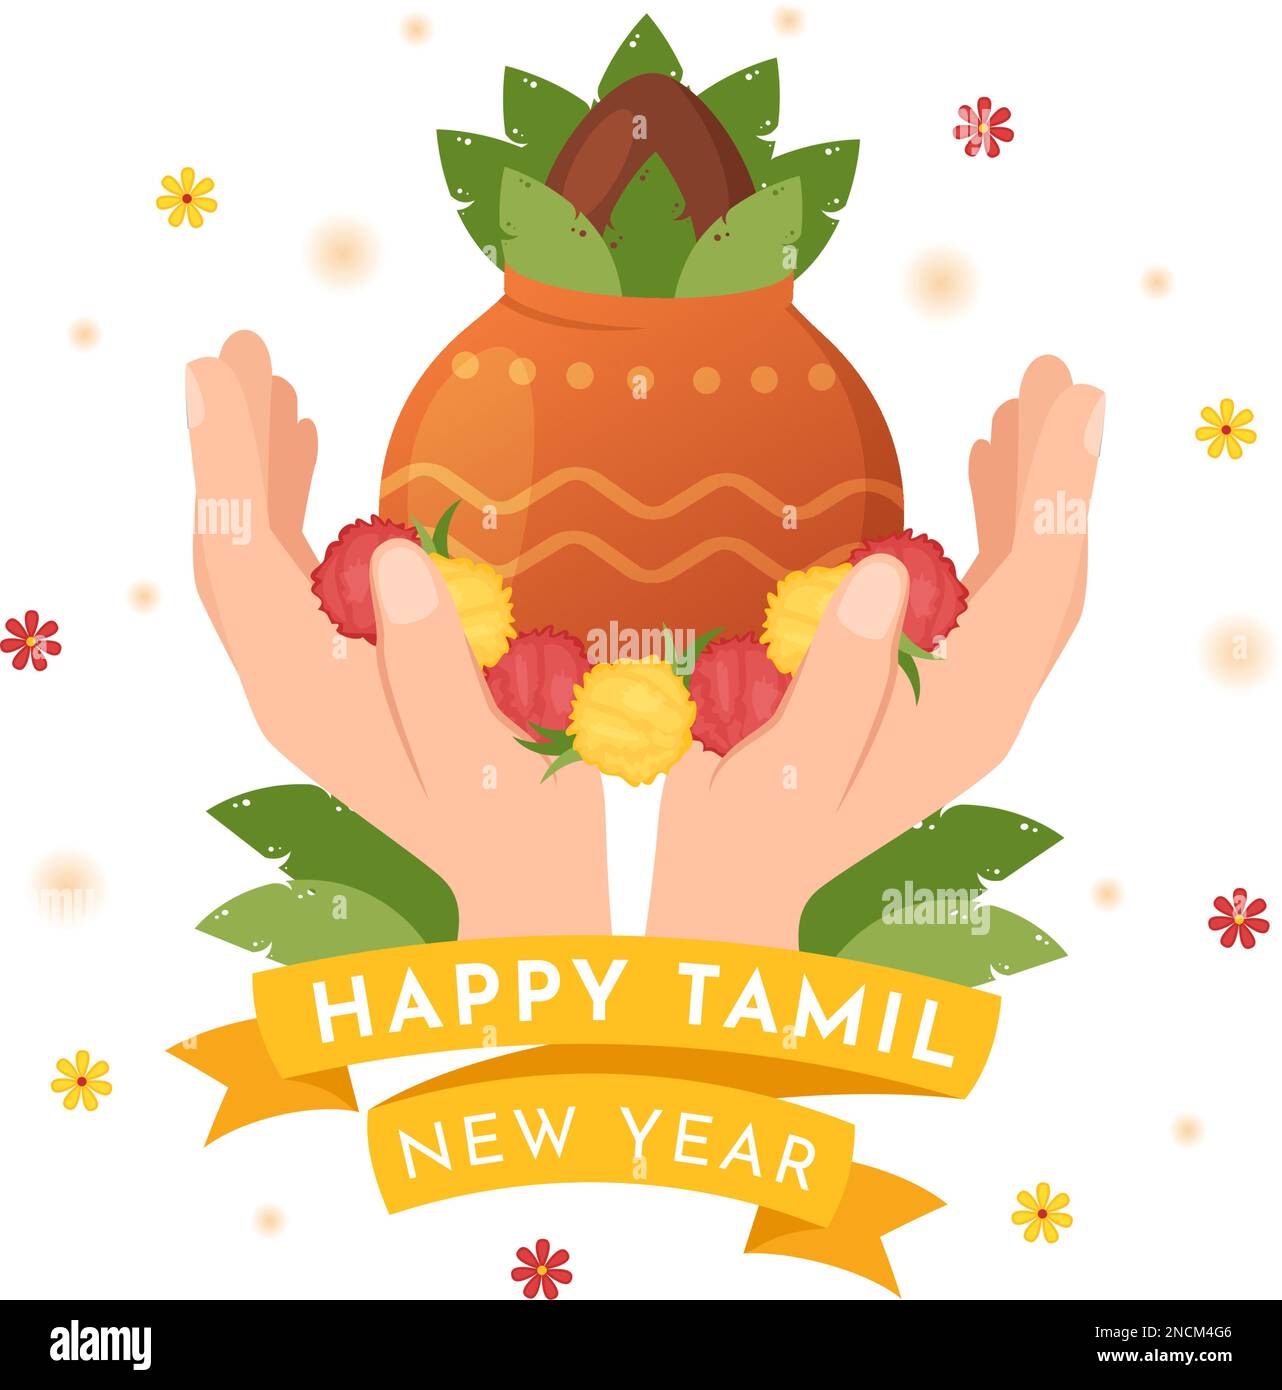 Happy Tamil New Year Illustration with Vishu Flowers, Pots and Indian Hindu Festival in Flat Cartoon Hand Drawn for Landing Page Templates Stock Vector